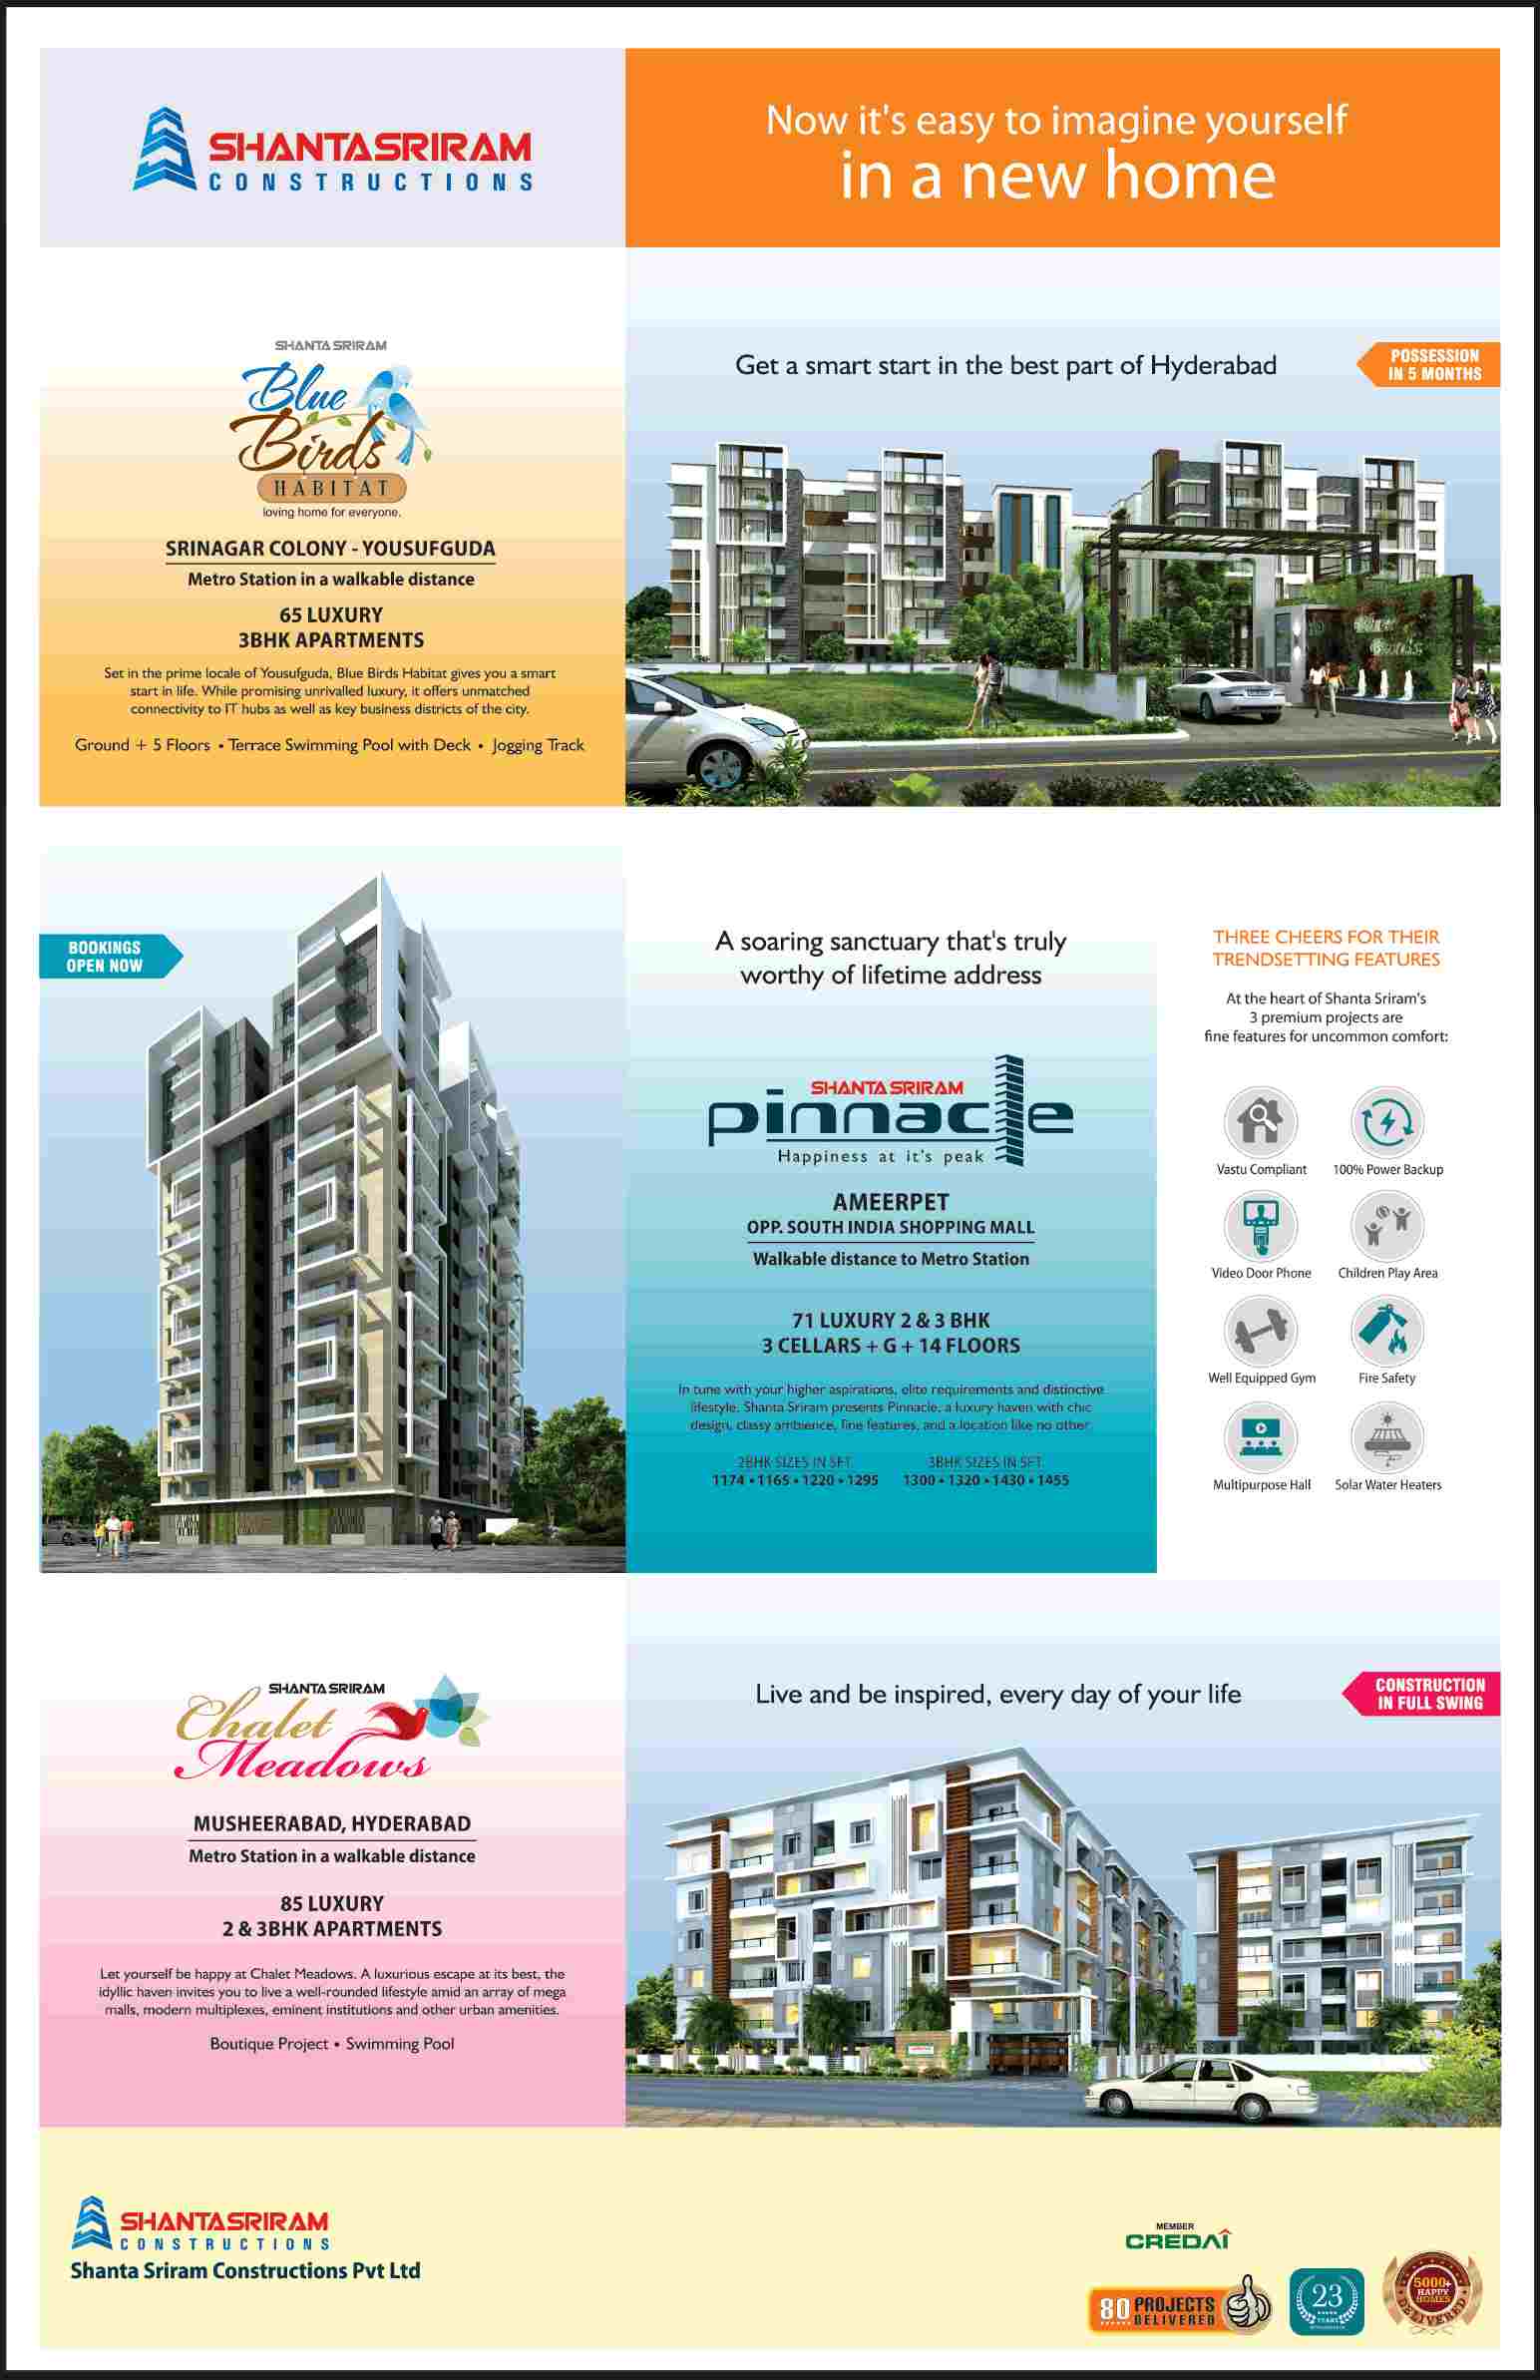 Imagine yourself in a new home by investing at Shanta Sriram Properties in Hyderabad